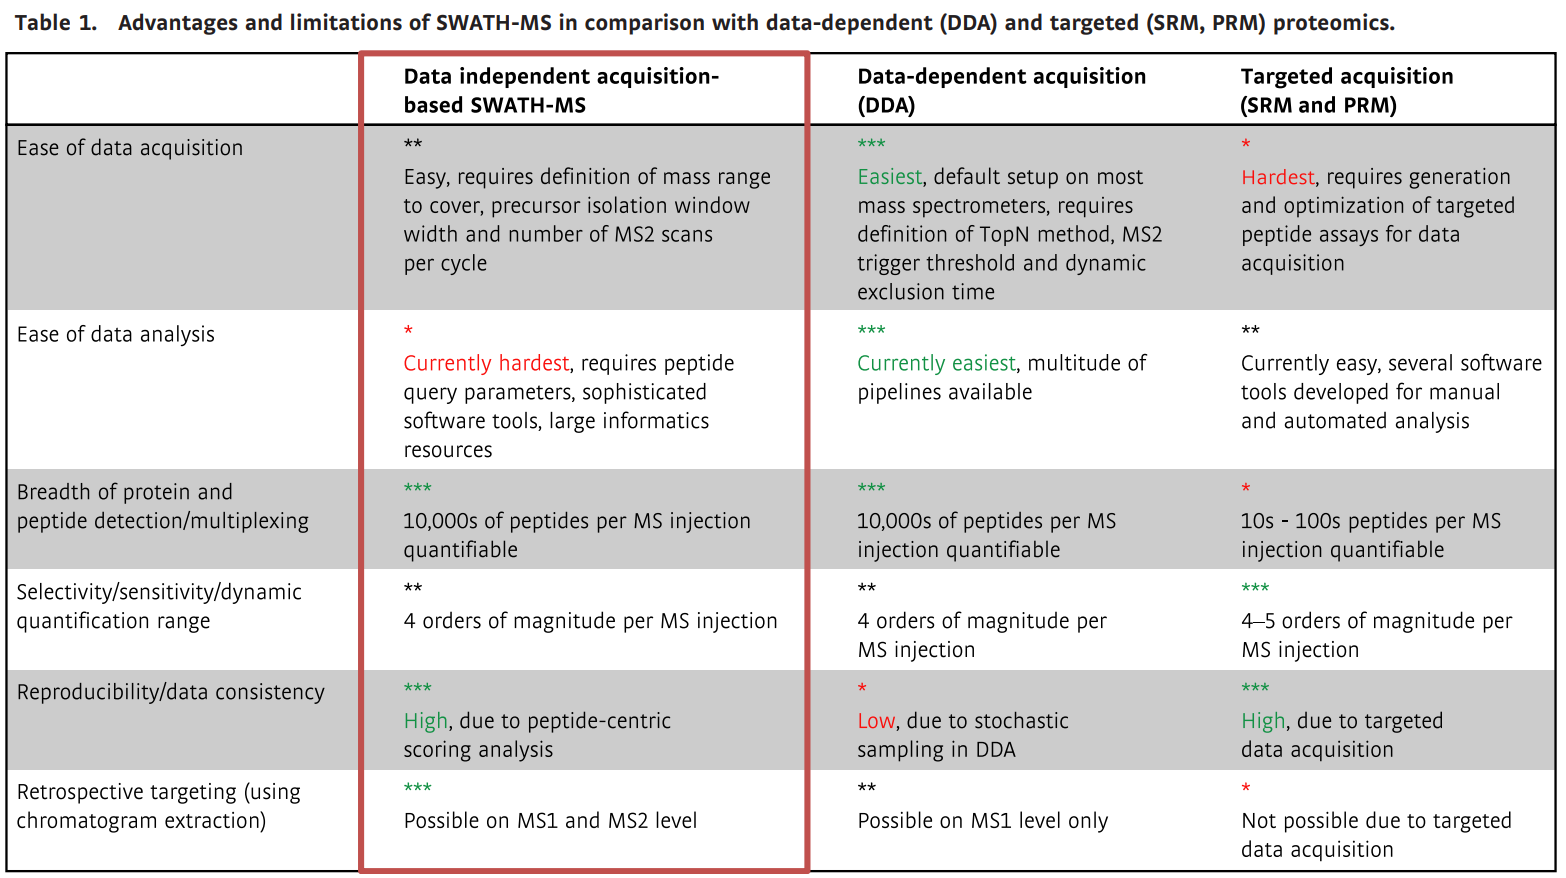 Advantages and limitations of SWATH-MS in comparison with data-dependent (DDA) and targeted (SRM, PRM) proteomics